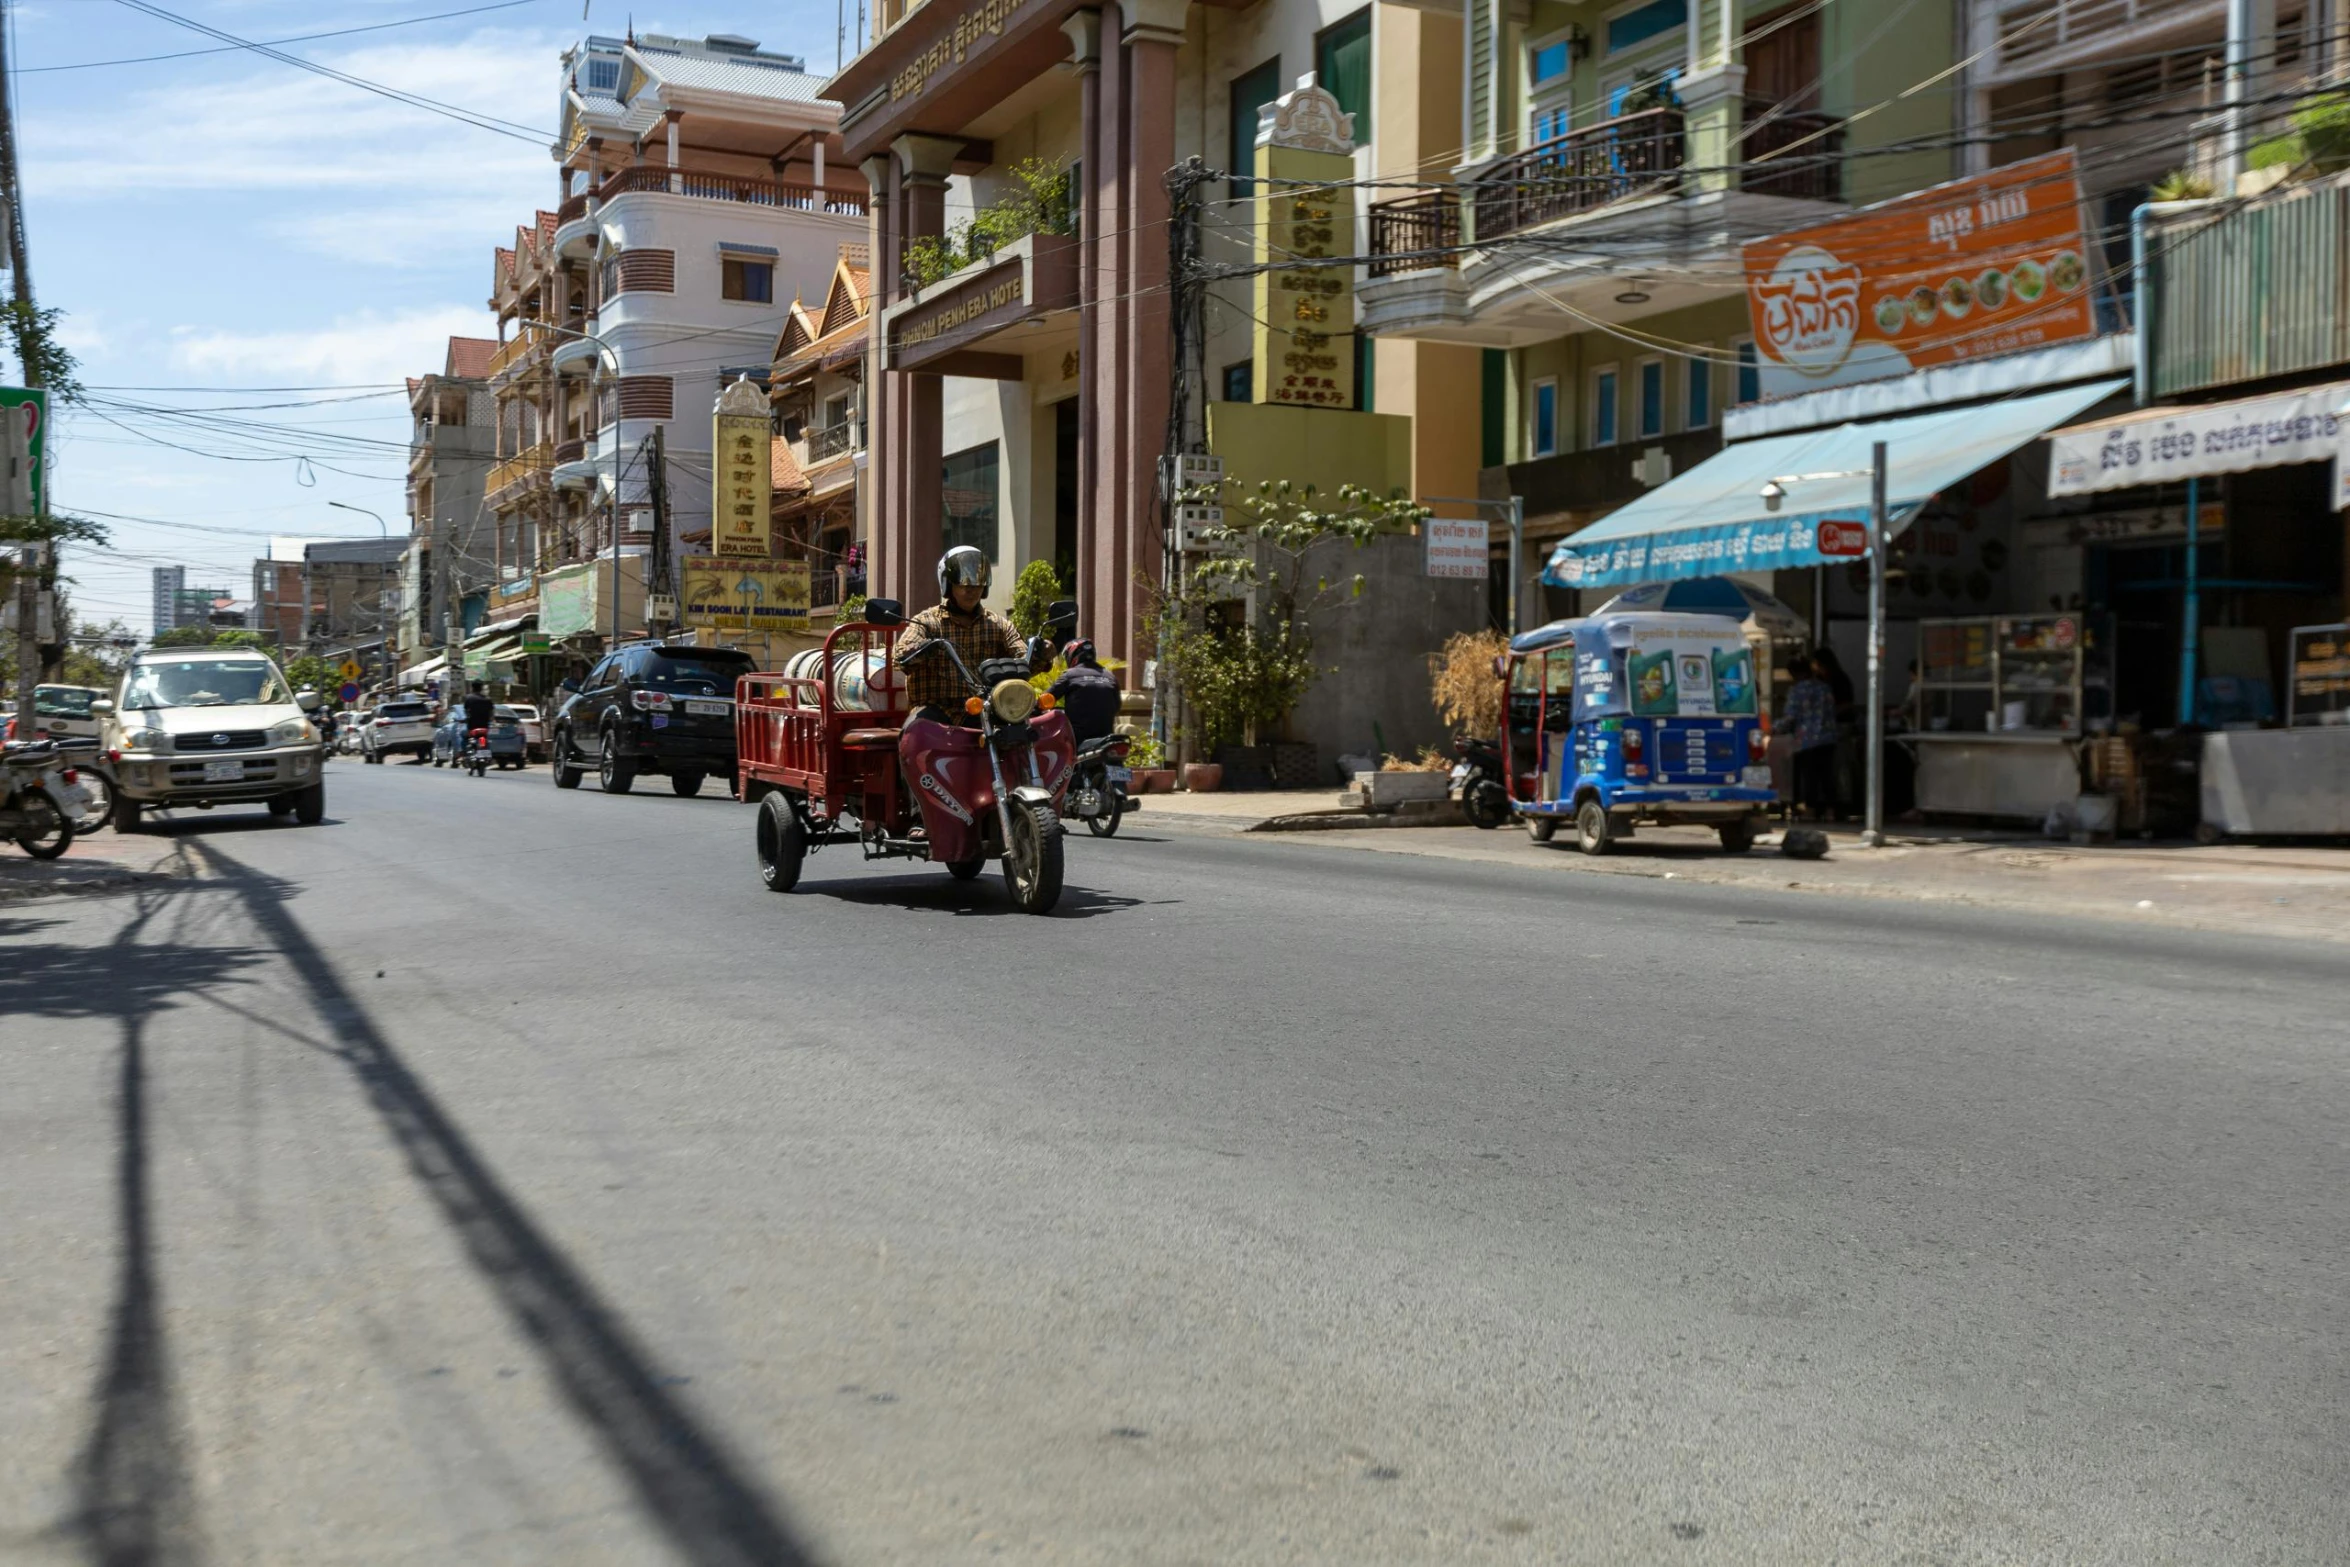 a motorcycle with a side car attached to it is driving down the street in front of other cars